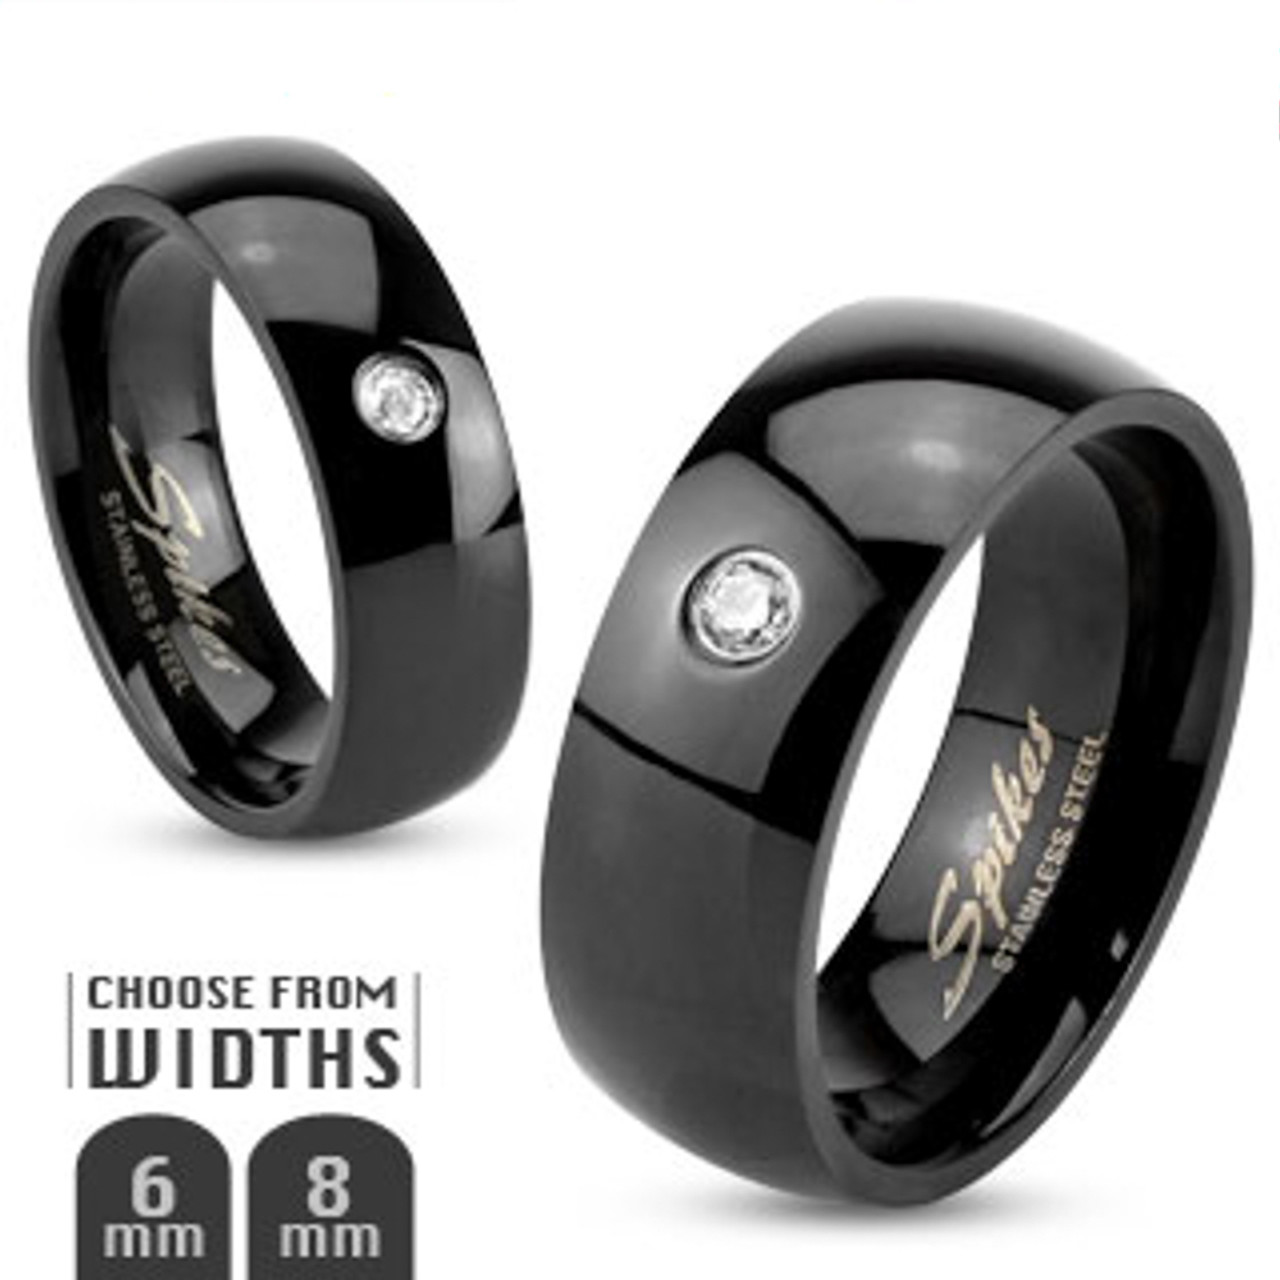  Marimor Jewelry His and Her Black Plated Stainless Steel Bridal  Ring Set and Titanium Wedding Band Women's Size 05 Men's Size 05 :  Clothing, Shoes & Jewelry